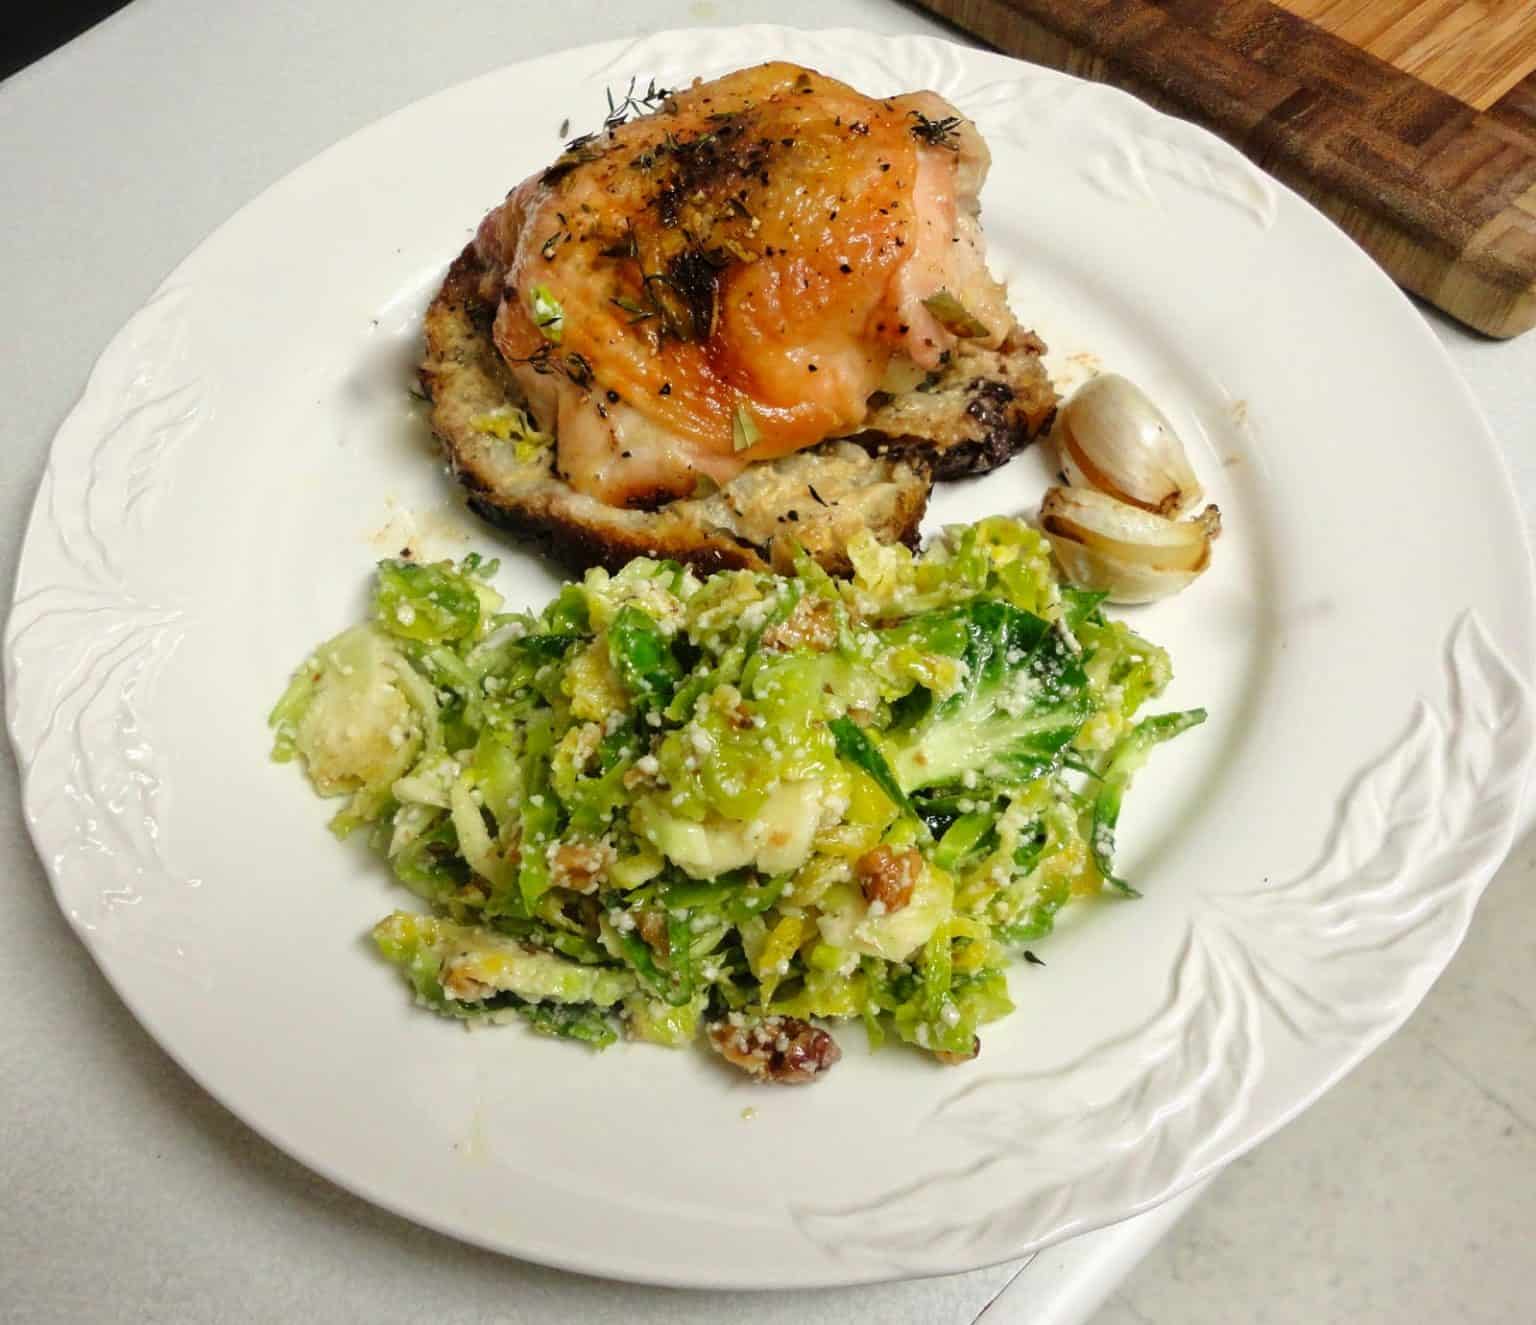 Melissa Clarks Mothers Recipe For Thyme Roasted Chicken With Mustard